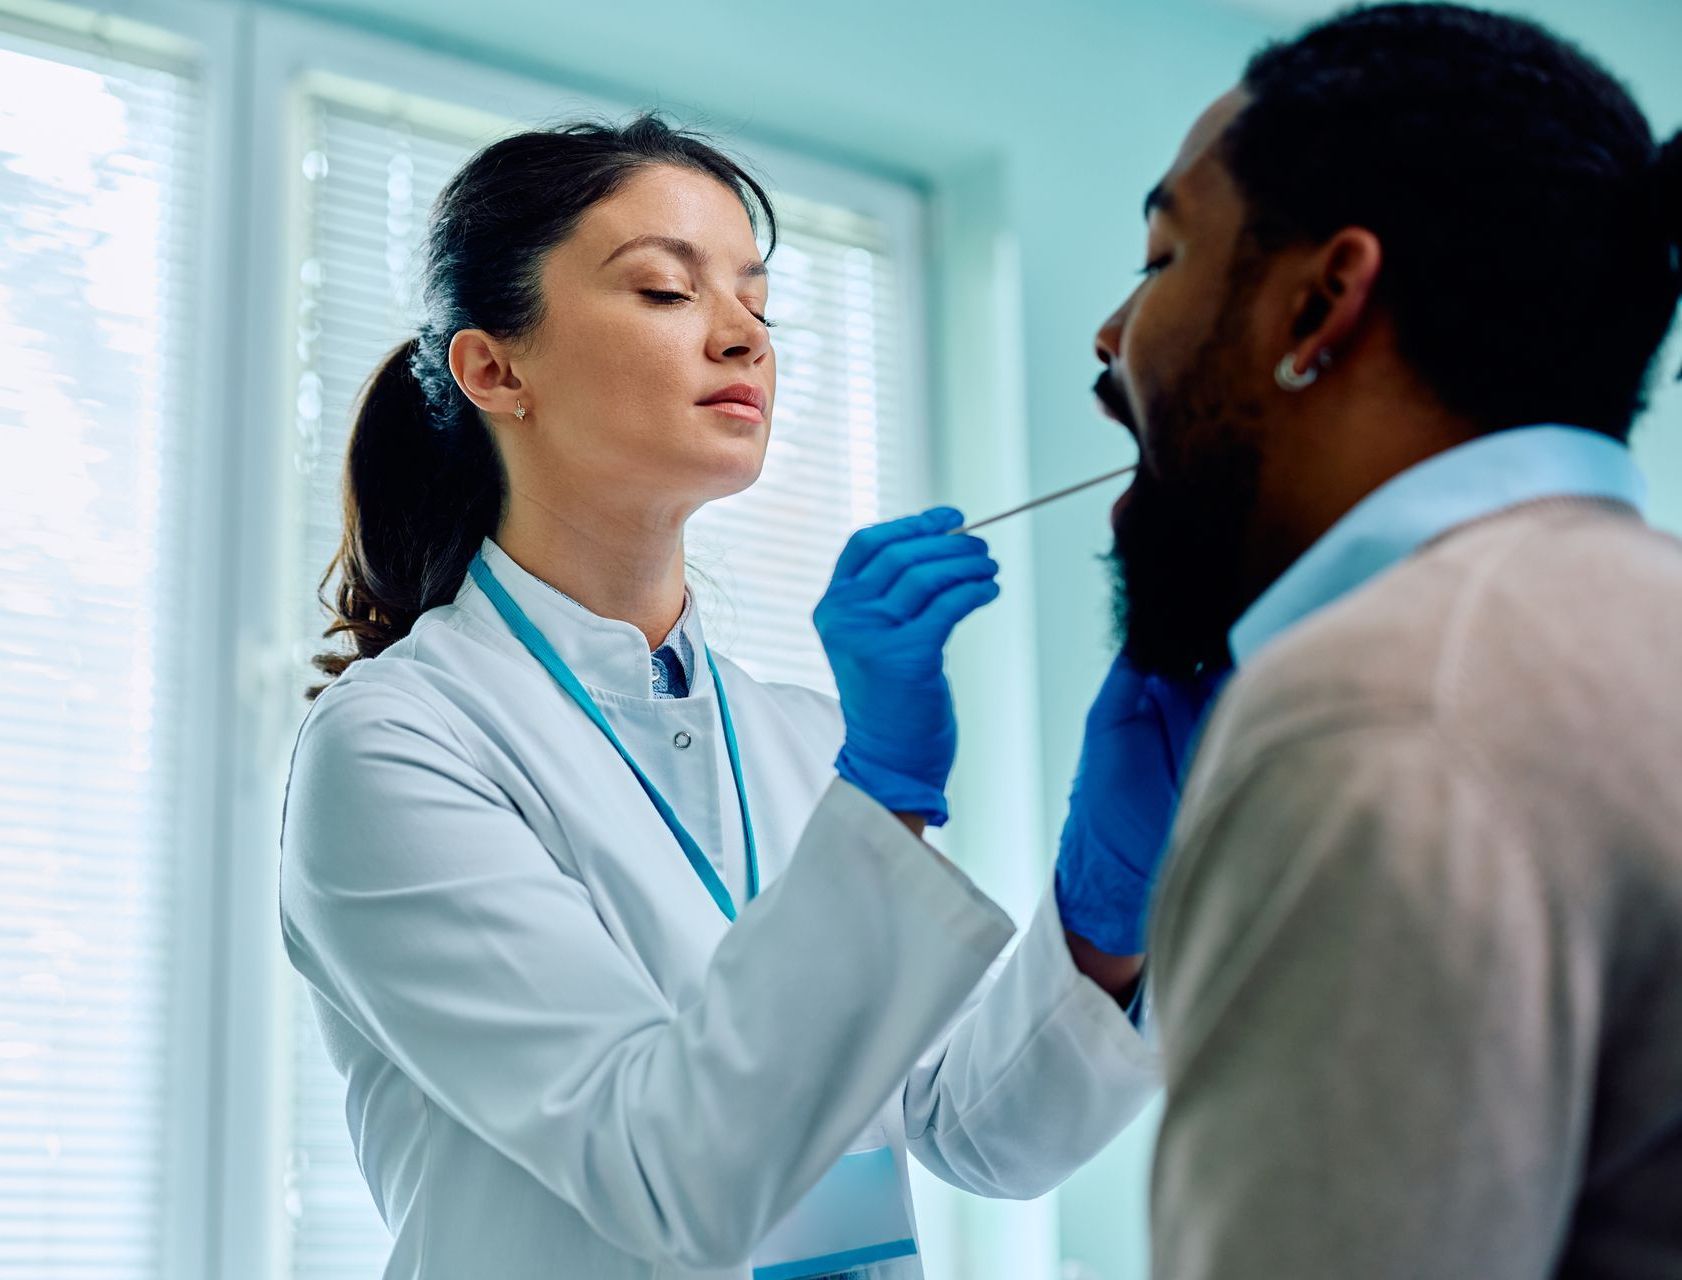 Doctor uses a throat swab to conduct a healthcare test